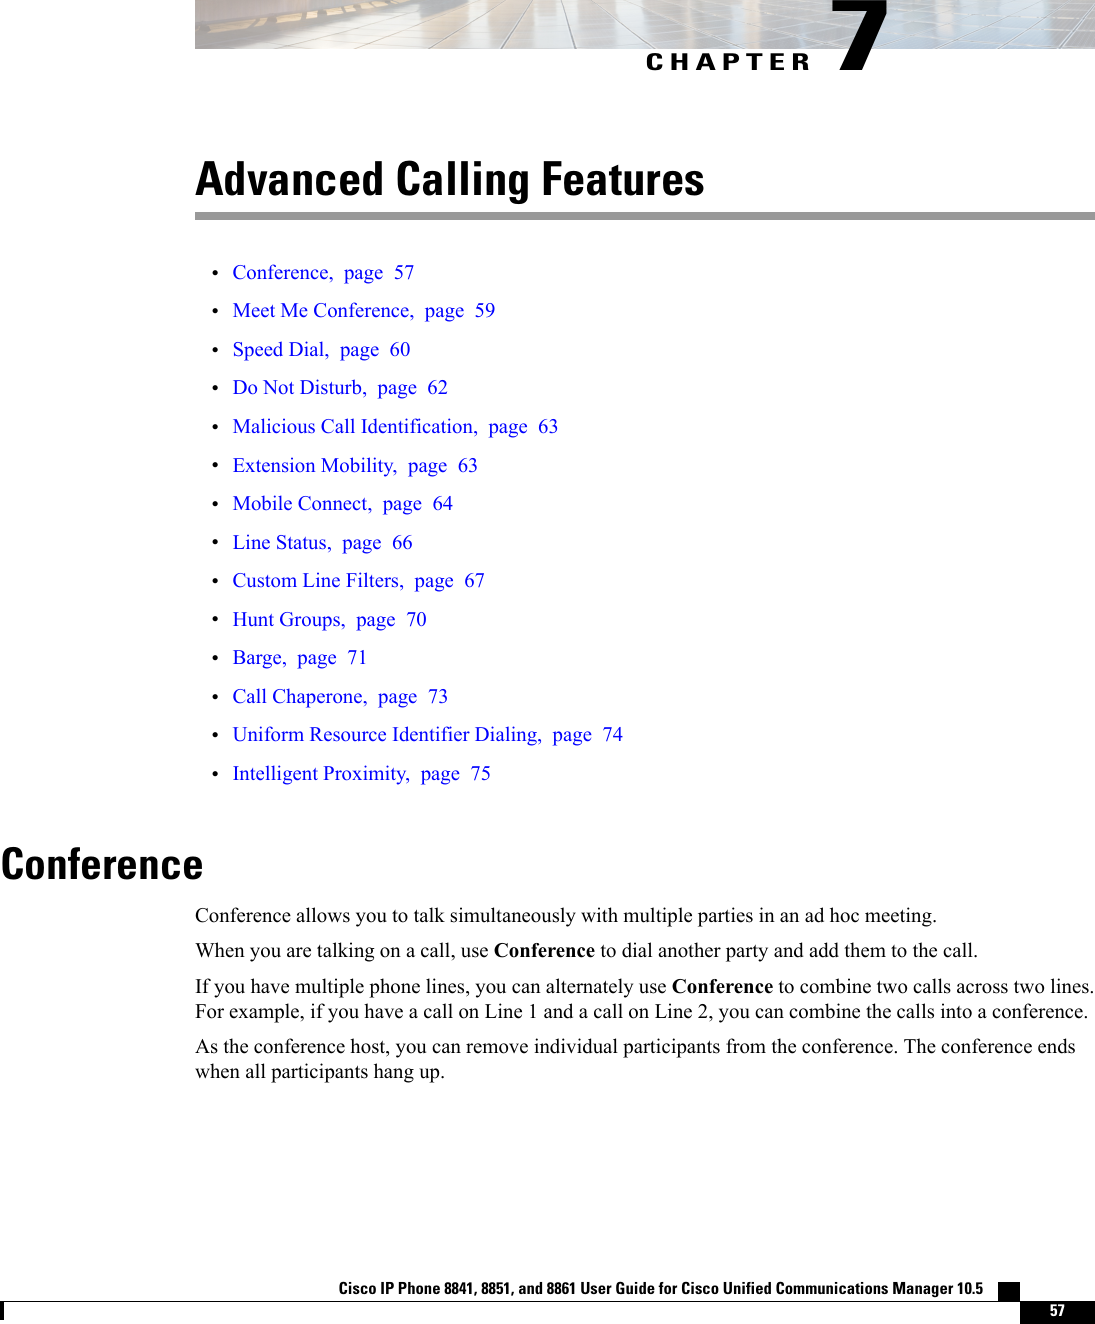 CHAPTER 7Advanced Calling Features•Conference, page 57•Meet Me Conference, page 59•Speed Dial, page 60•Do Not Disturb, page 62•Malicious Call Identification, page 63•Extension Mobility, page 63•Mobile Connect, page 64•Line Status, page 66•Custom Line Filters, page 67•Hunt Groups, page 70•Barge, page 71•Call Chaperone, page 73•Uniform Resource Identifier Dialing, page 74•Intelligent Proximity, page 75ConferenceConference allows you to talk simultaneously with multiple parties in an ad hoc meeting.When you are talking on a call, use Conference to dial another party and add them to the call.If you have multiple phone lines, you can alternately use Conference to combine two calls across two lines.For example, if you have a call on Line 1 and a call on Line 2, you can combine the calls into a conference.As the conference host, you can remove individual participants from the conference. The conference endswhen all participants hang up.Cisco IP Phone 8841, 8851, and 8861 User Guide for Cisco Unified Communications Manager 10.5    57